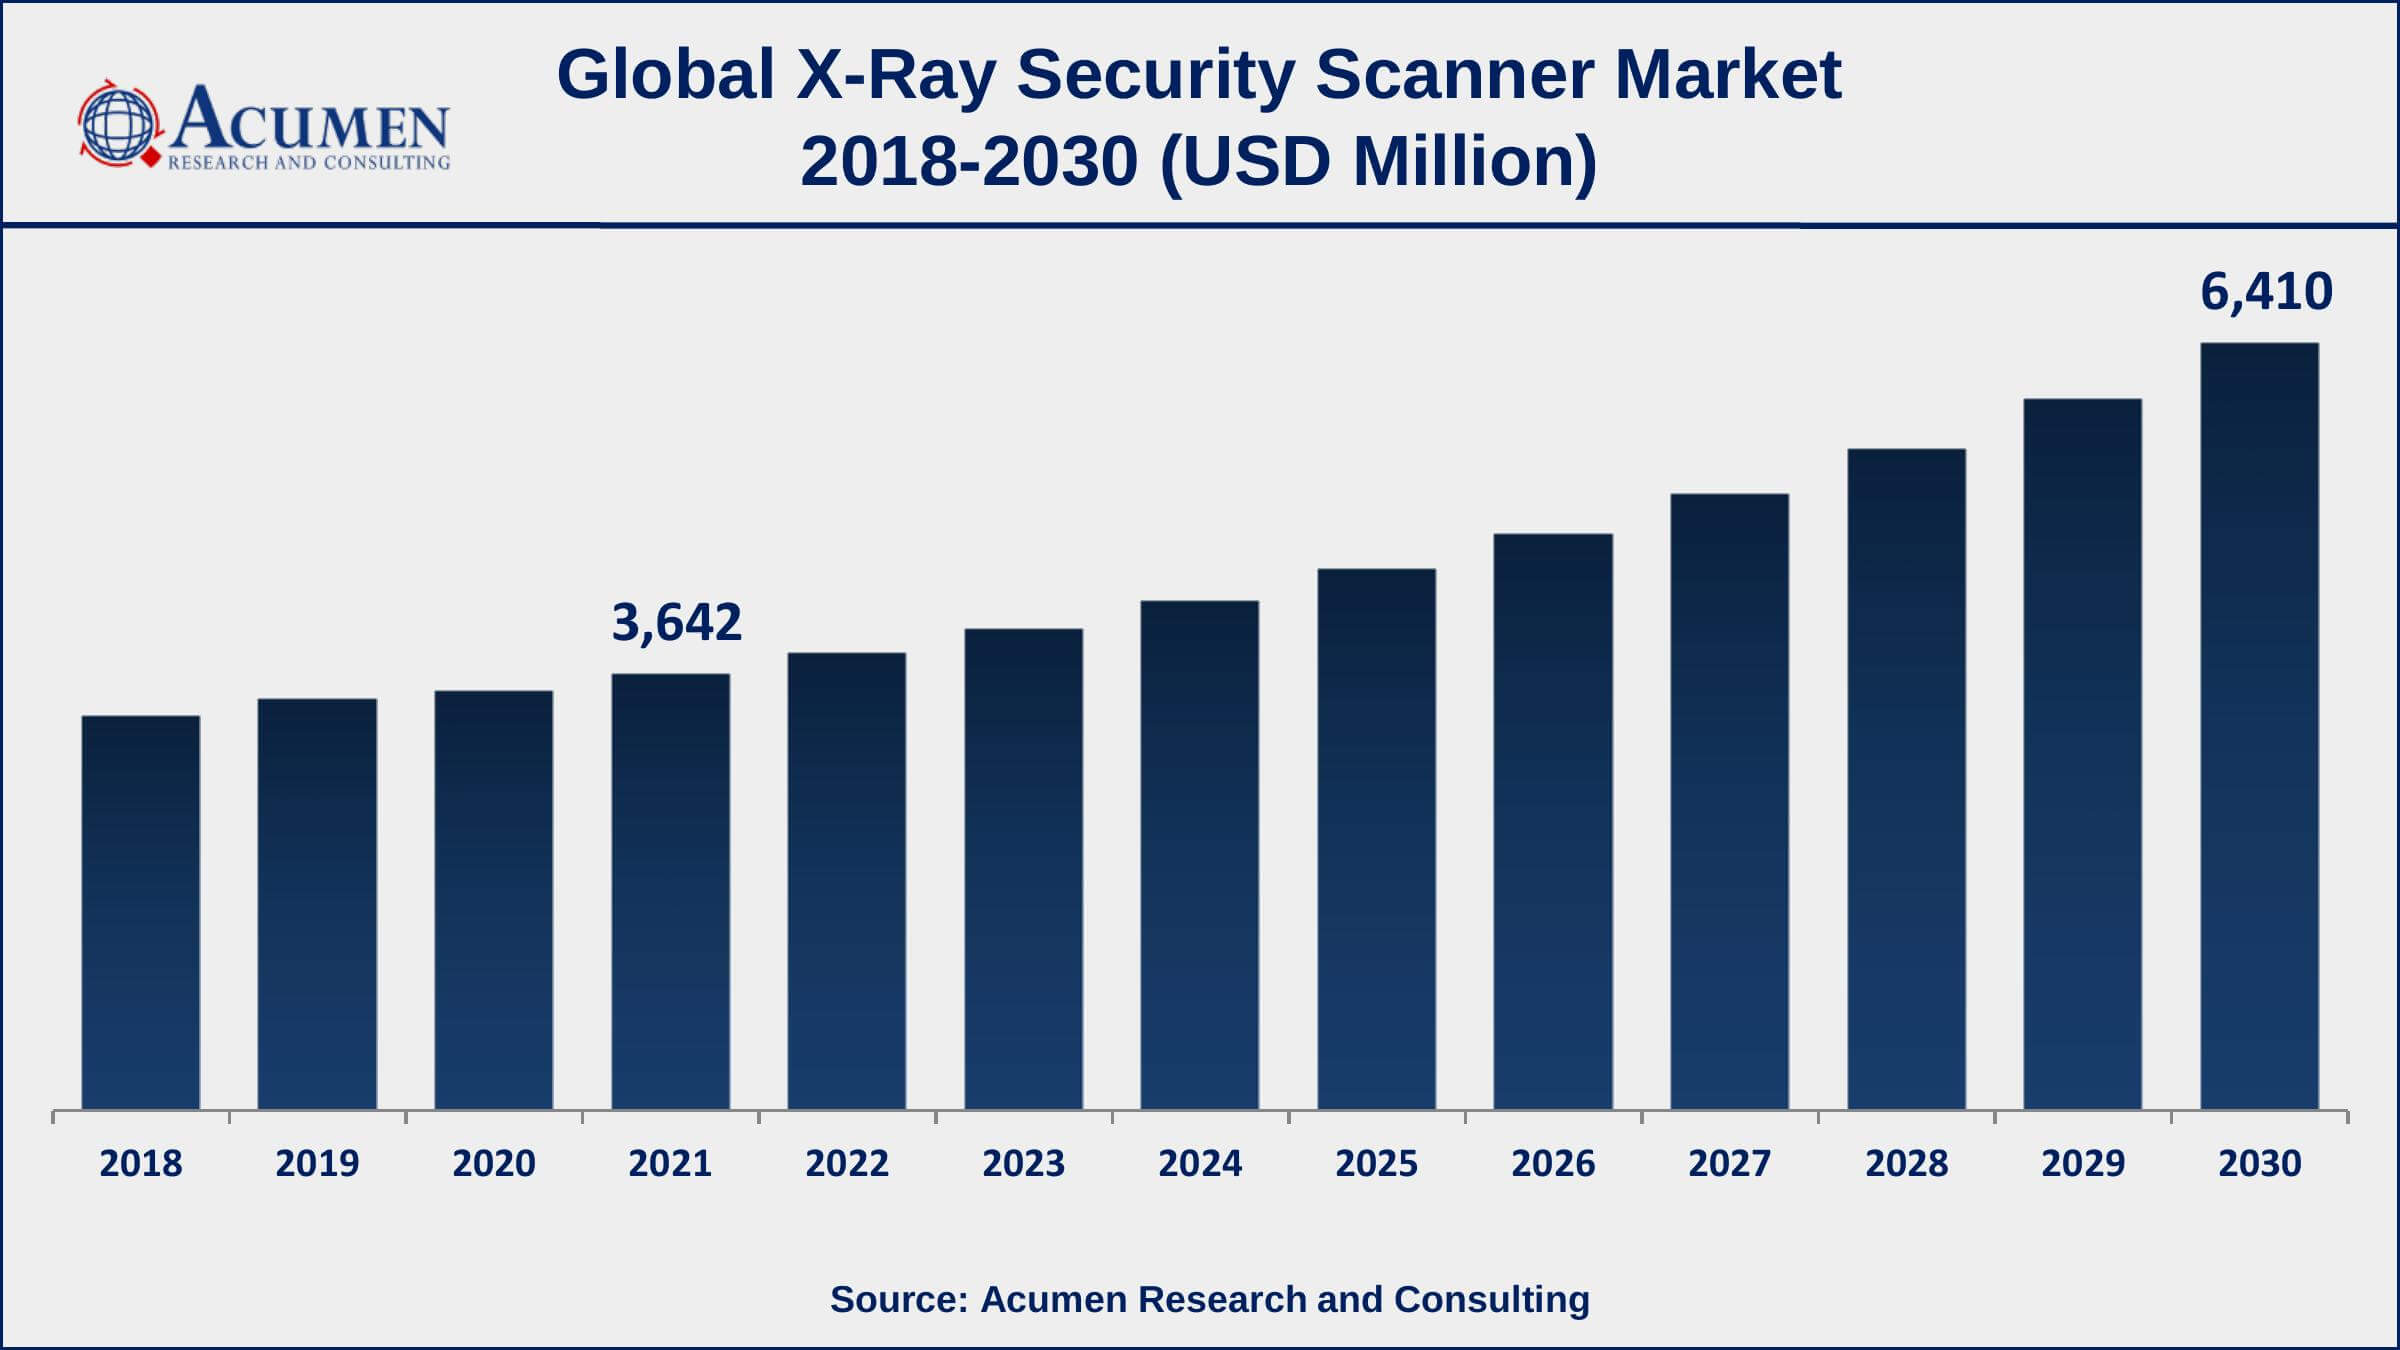 Asia-Pacific X-ray security scanner market growth will observe strongest CAGR from 2022 to 2030